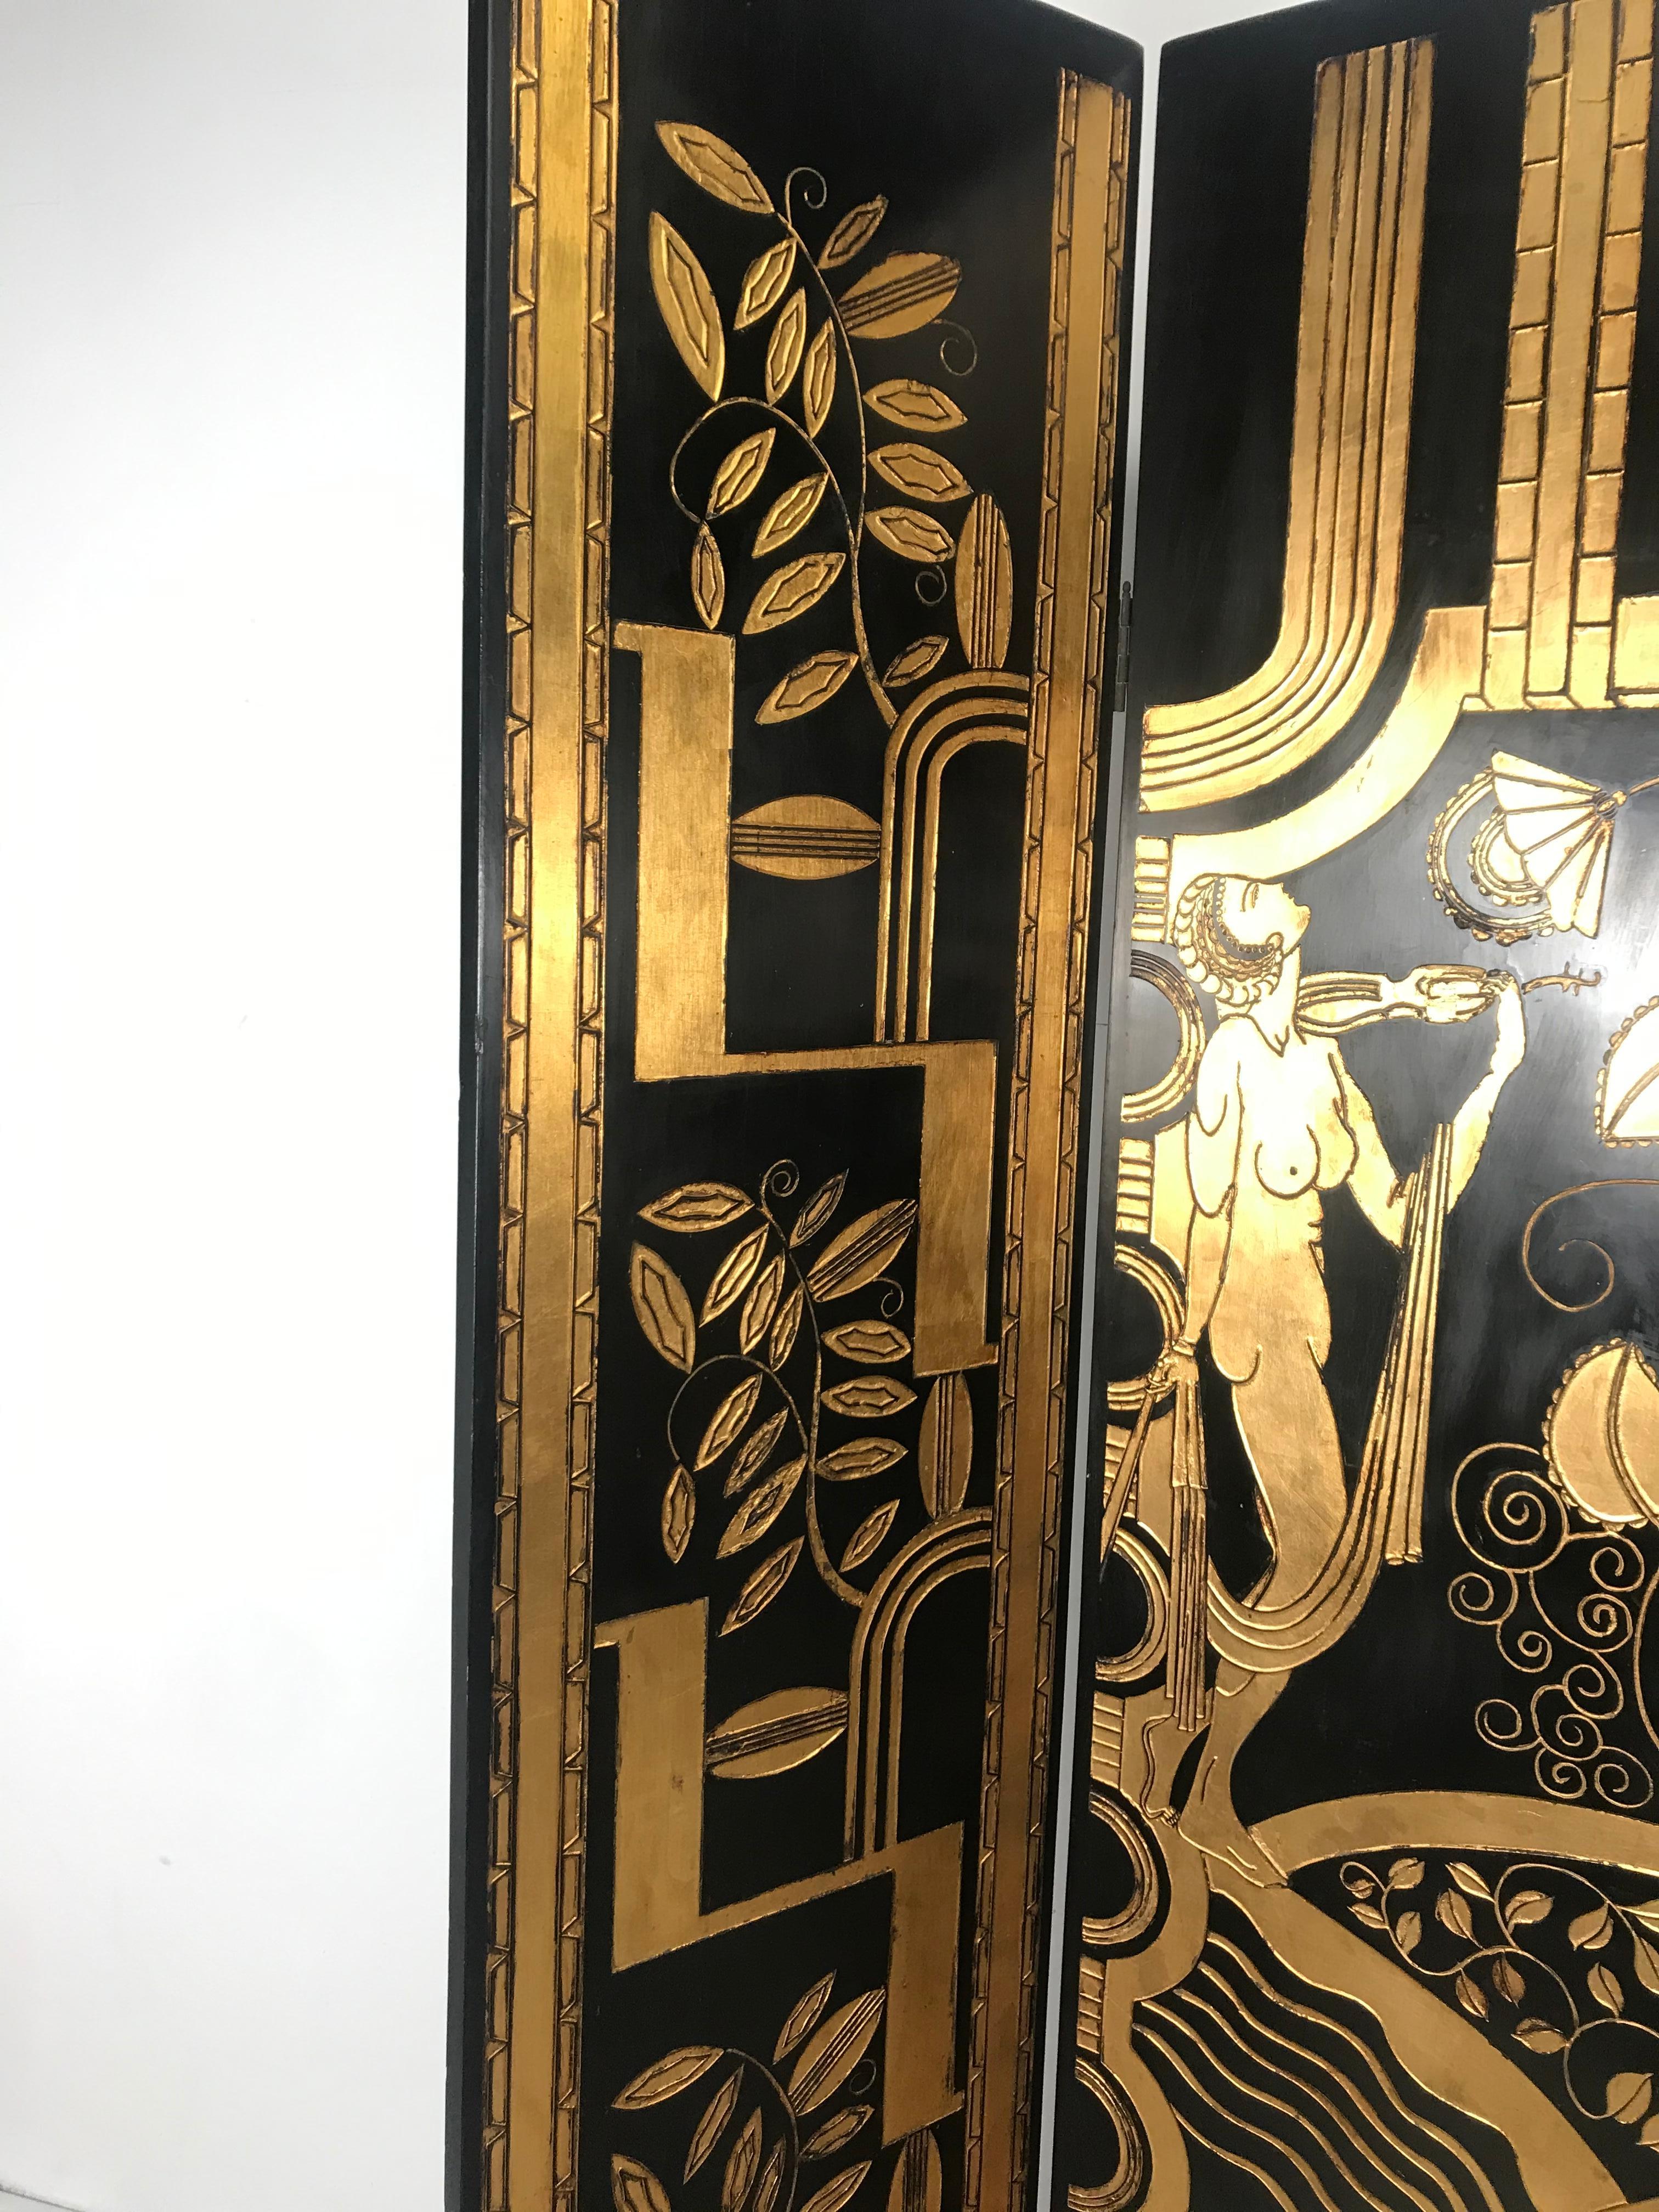 Stunning Art Deco Revival 4 panel screen / room divider, carved, lacquered and gilt, depicting stylized woman, flowers giometric motif, Four hinged panels measuring 16